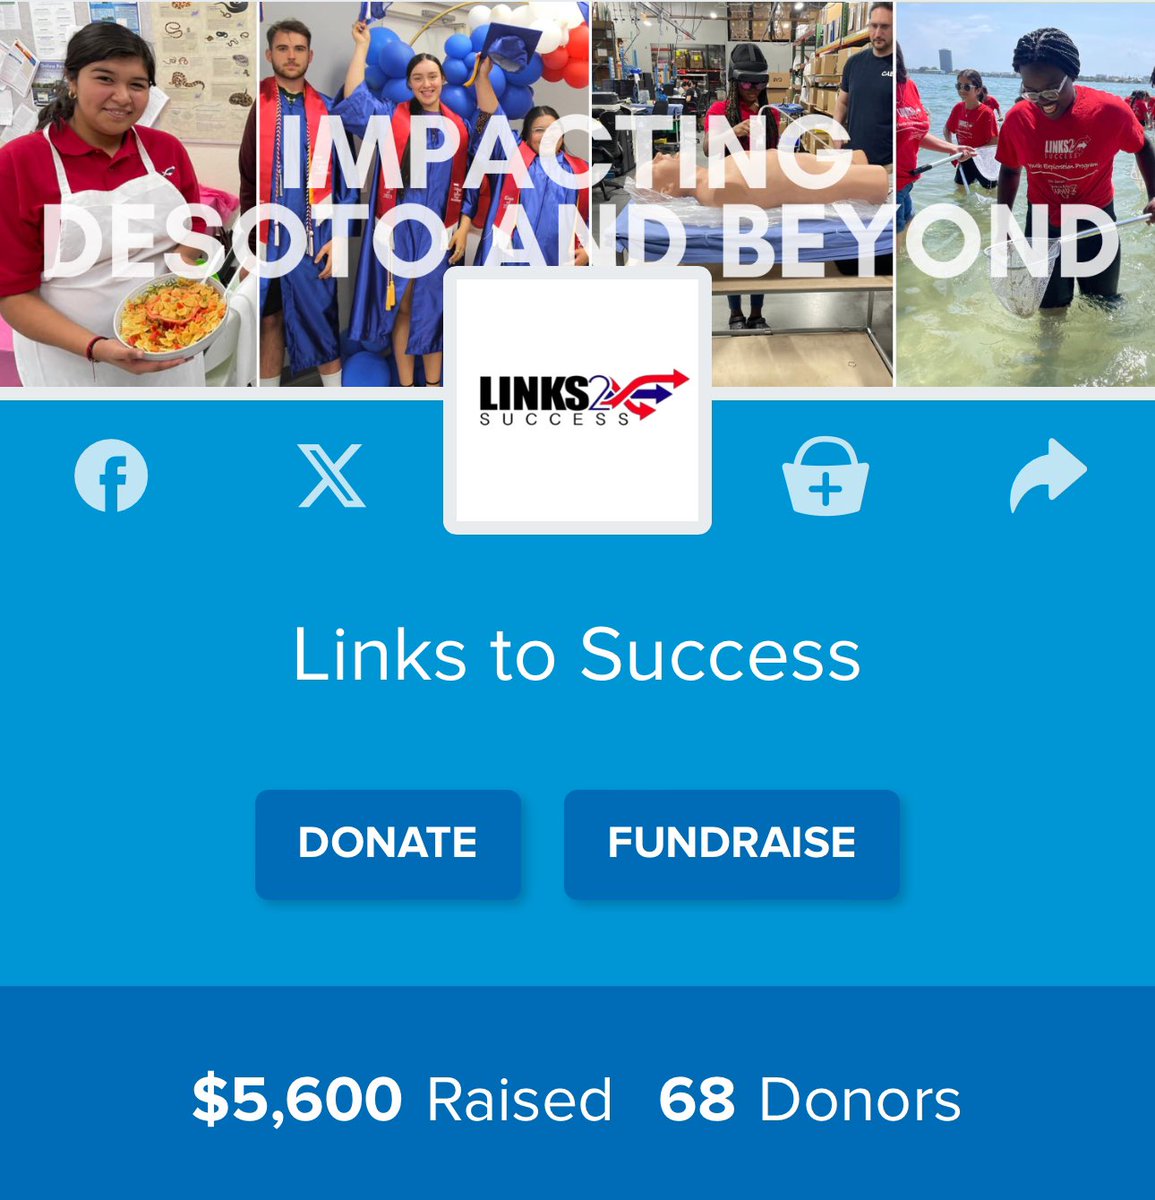 There’s 3 and a half hours left to have your donations to @Links2Success matched! We are so close to 70 donors, will you help get us there? I can’t even thank you all enough for supporting our students so much for the Giving Challenge!! Donate Here: givingchallenge.org/organizations/…